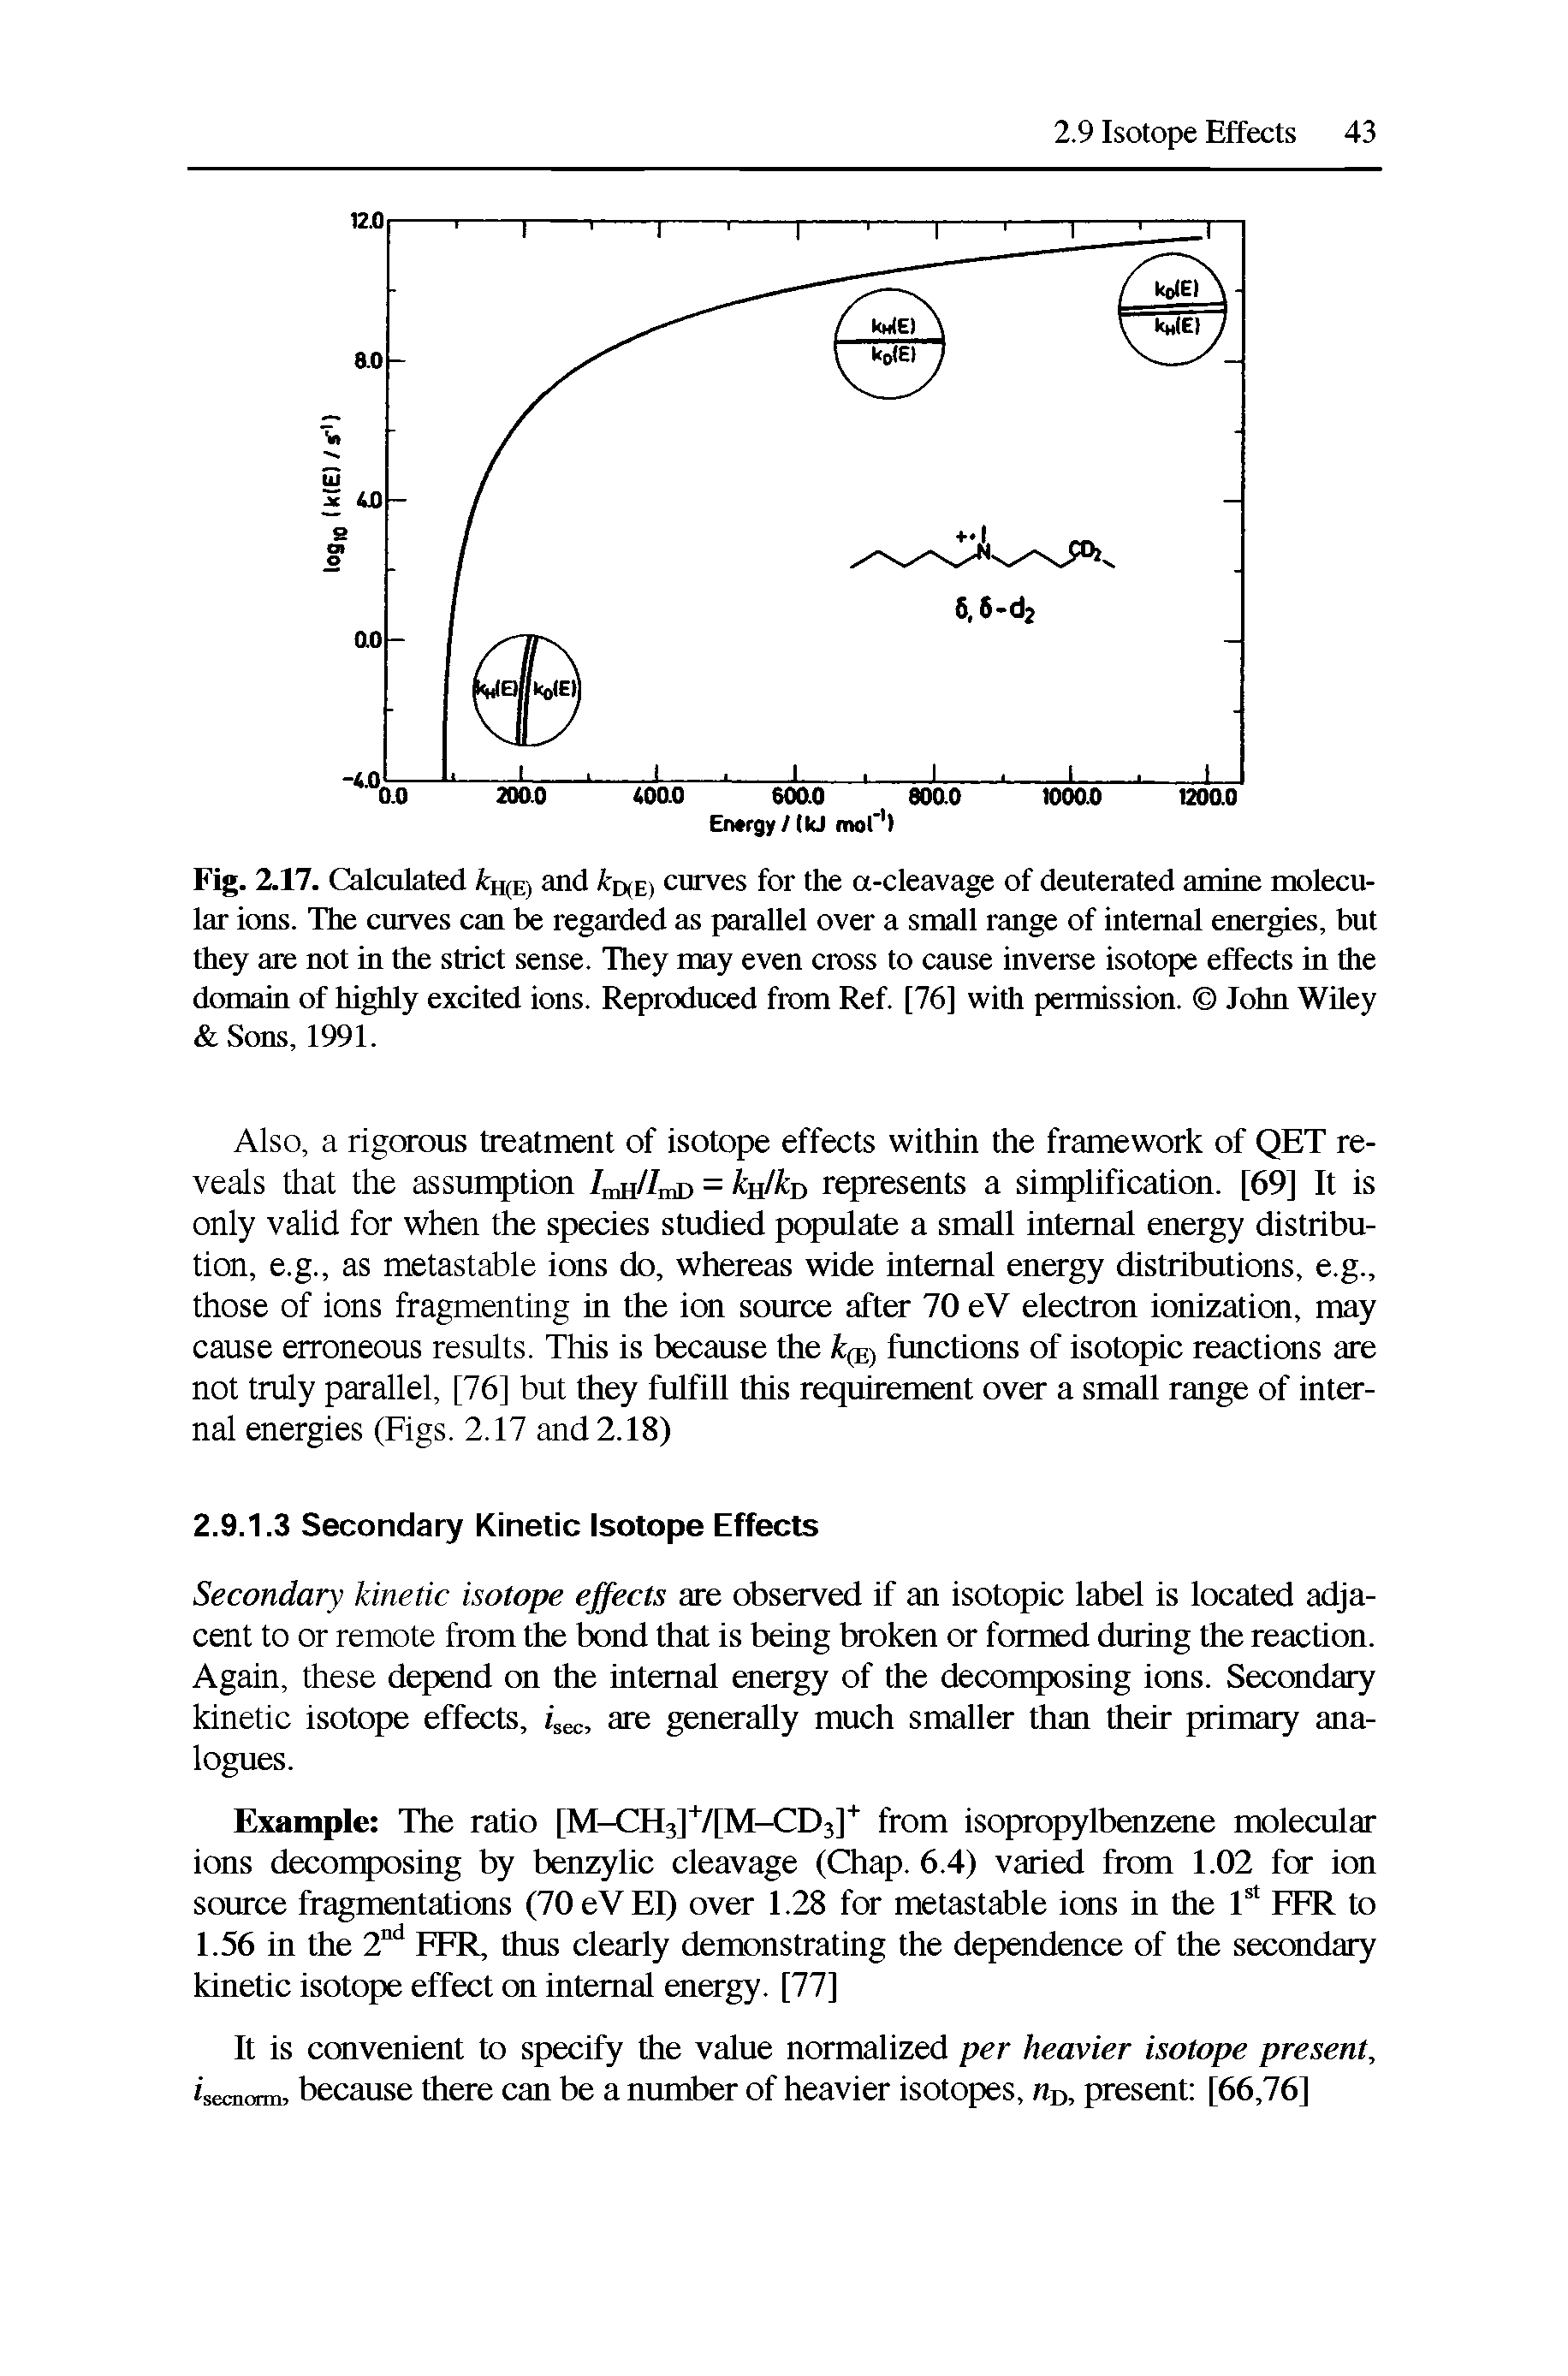 Fig. 2.17. Calculated fcn(E) and d(E) curves for the a-cleavage of deuterated amine molecular ions. The curves can be regarded as parallel over a small range of internal energies, but they are not in the strict sense. They may even cross to cause inverse isotope effects in the domain of highly excited ions. Reproduced from Ref. [76] with permission. John Wiley Sons, 1991.